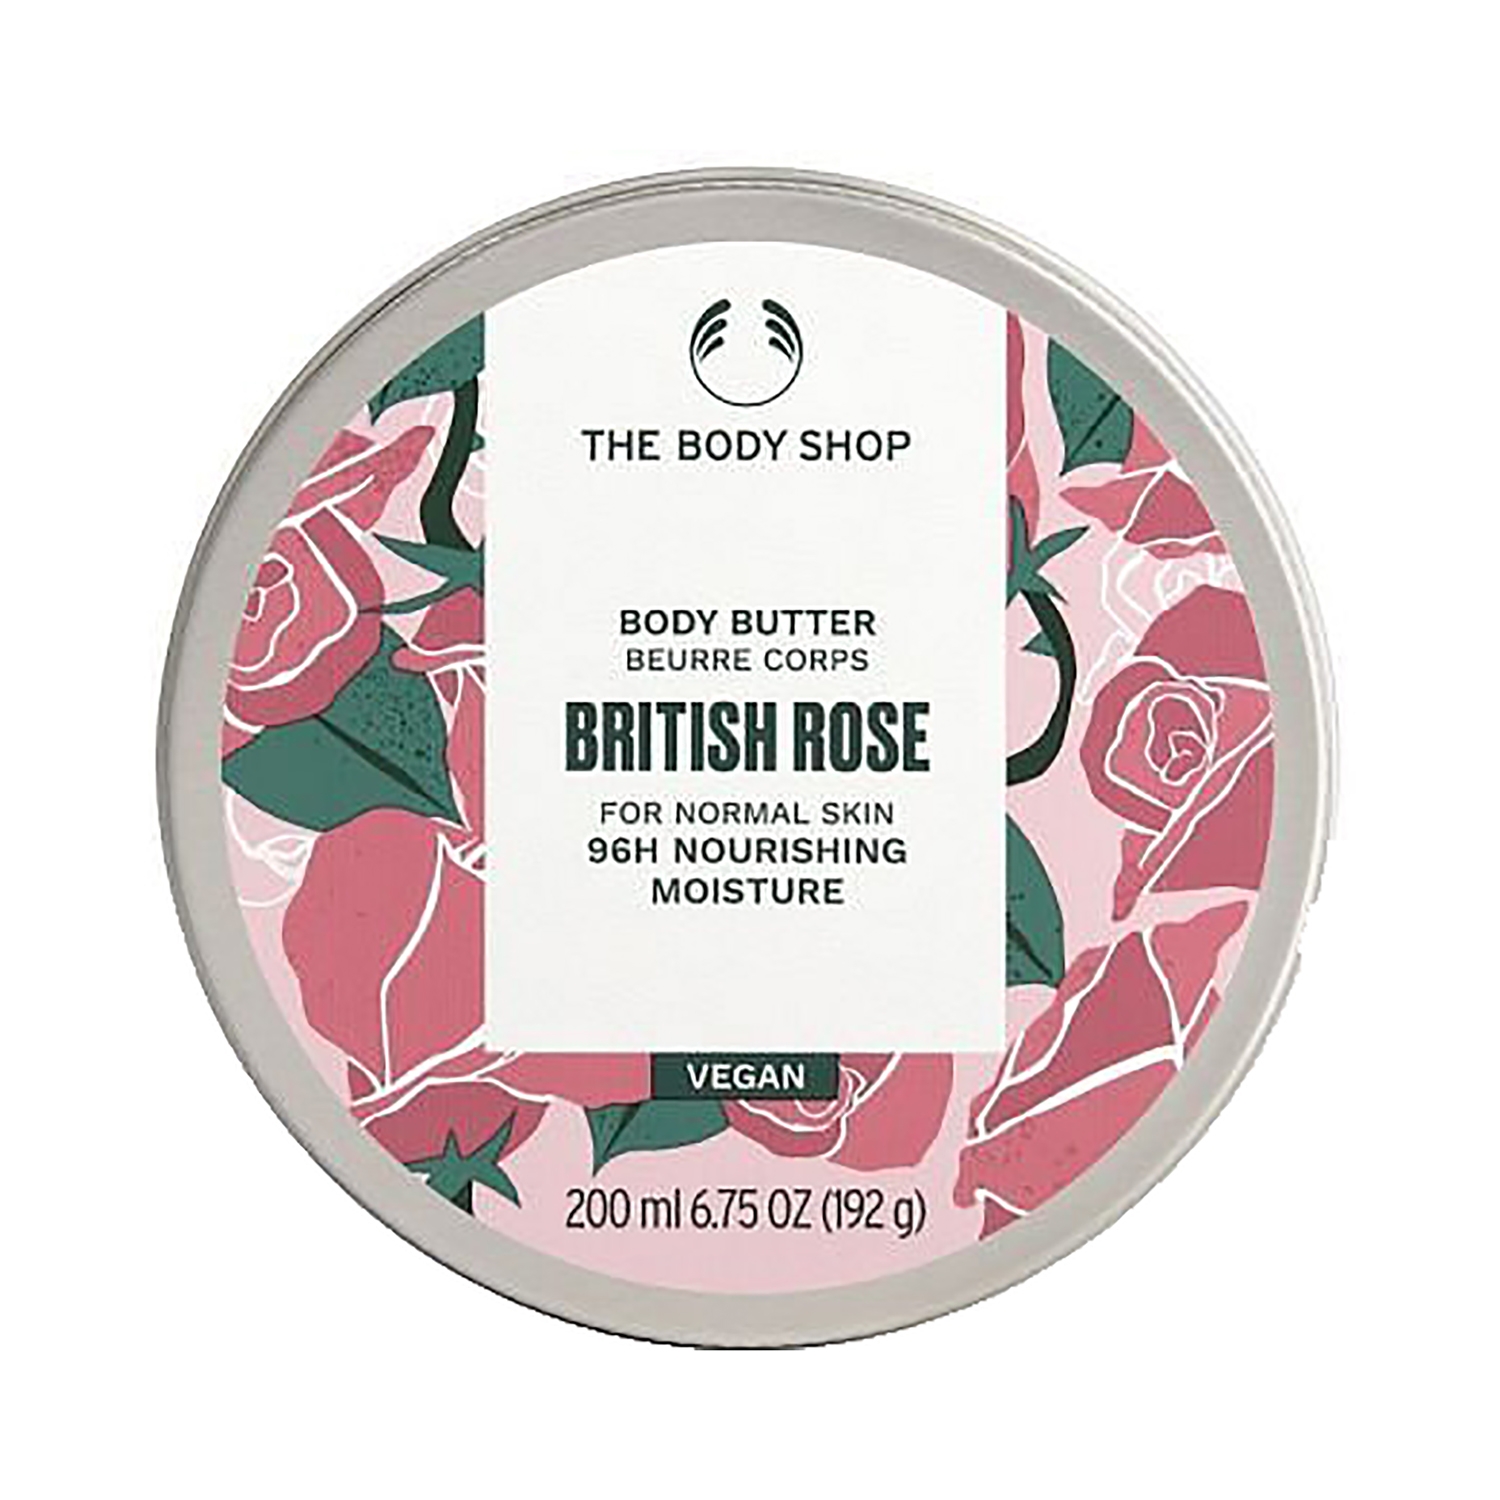 The Body Shop | The Body Shop British Rose Body Butter (200ml)